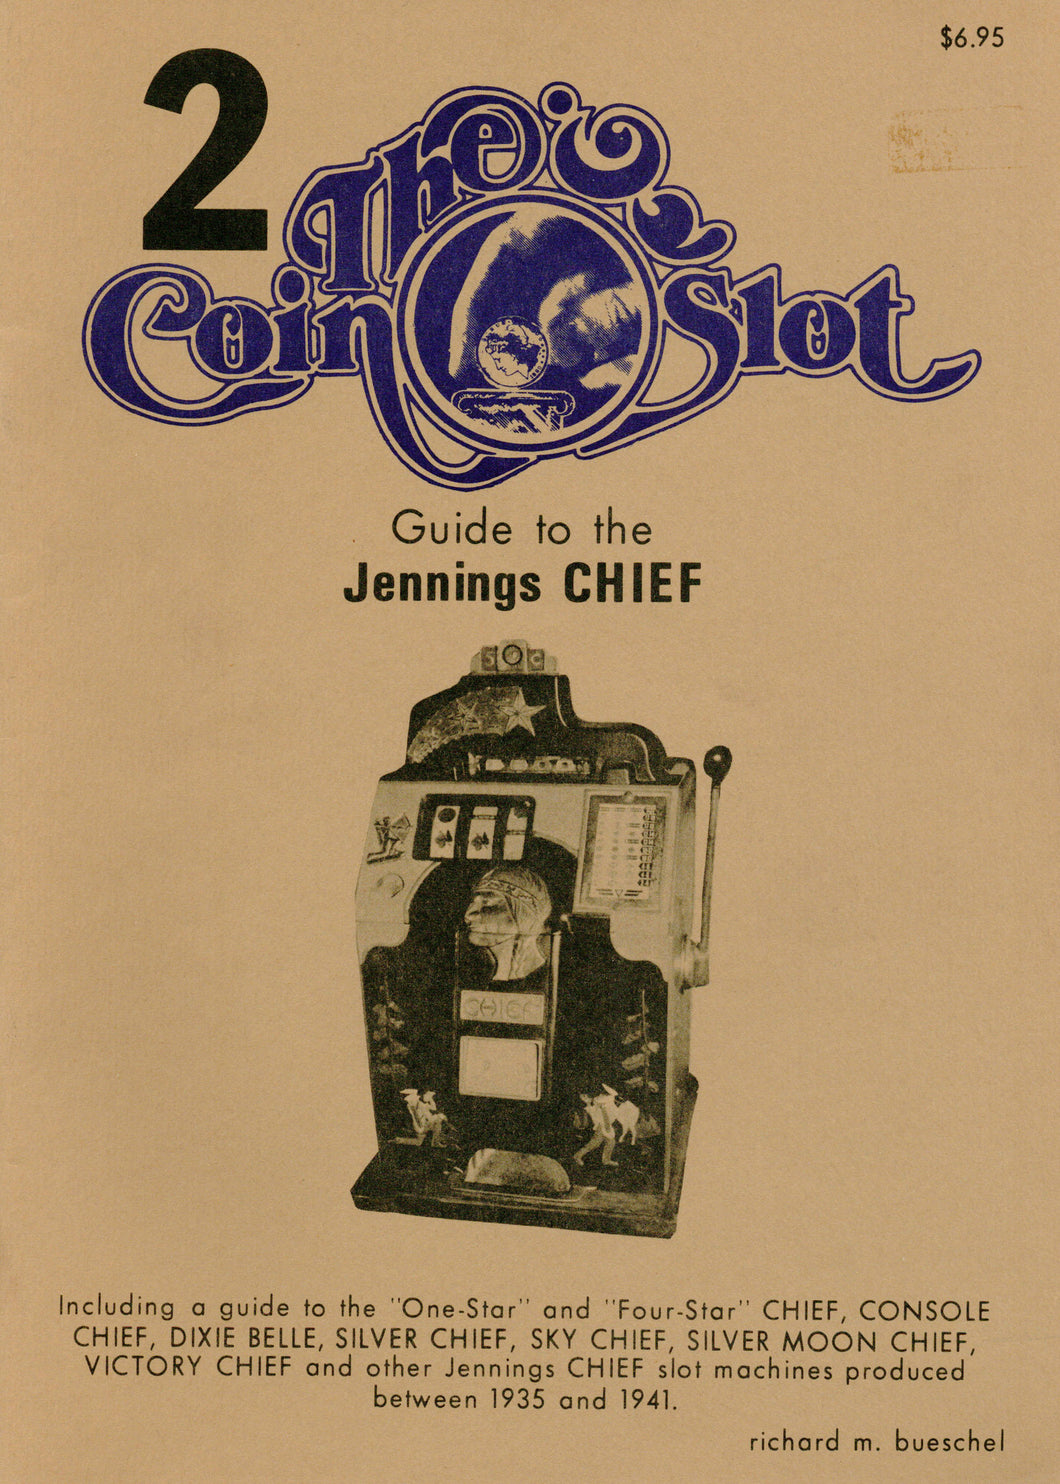 Coin Slot # 2. Guide to the Jennings Chief